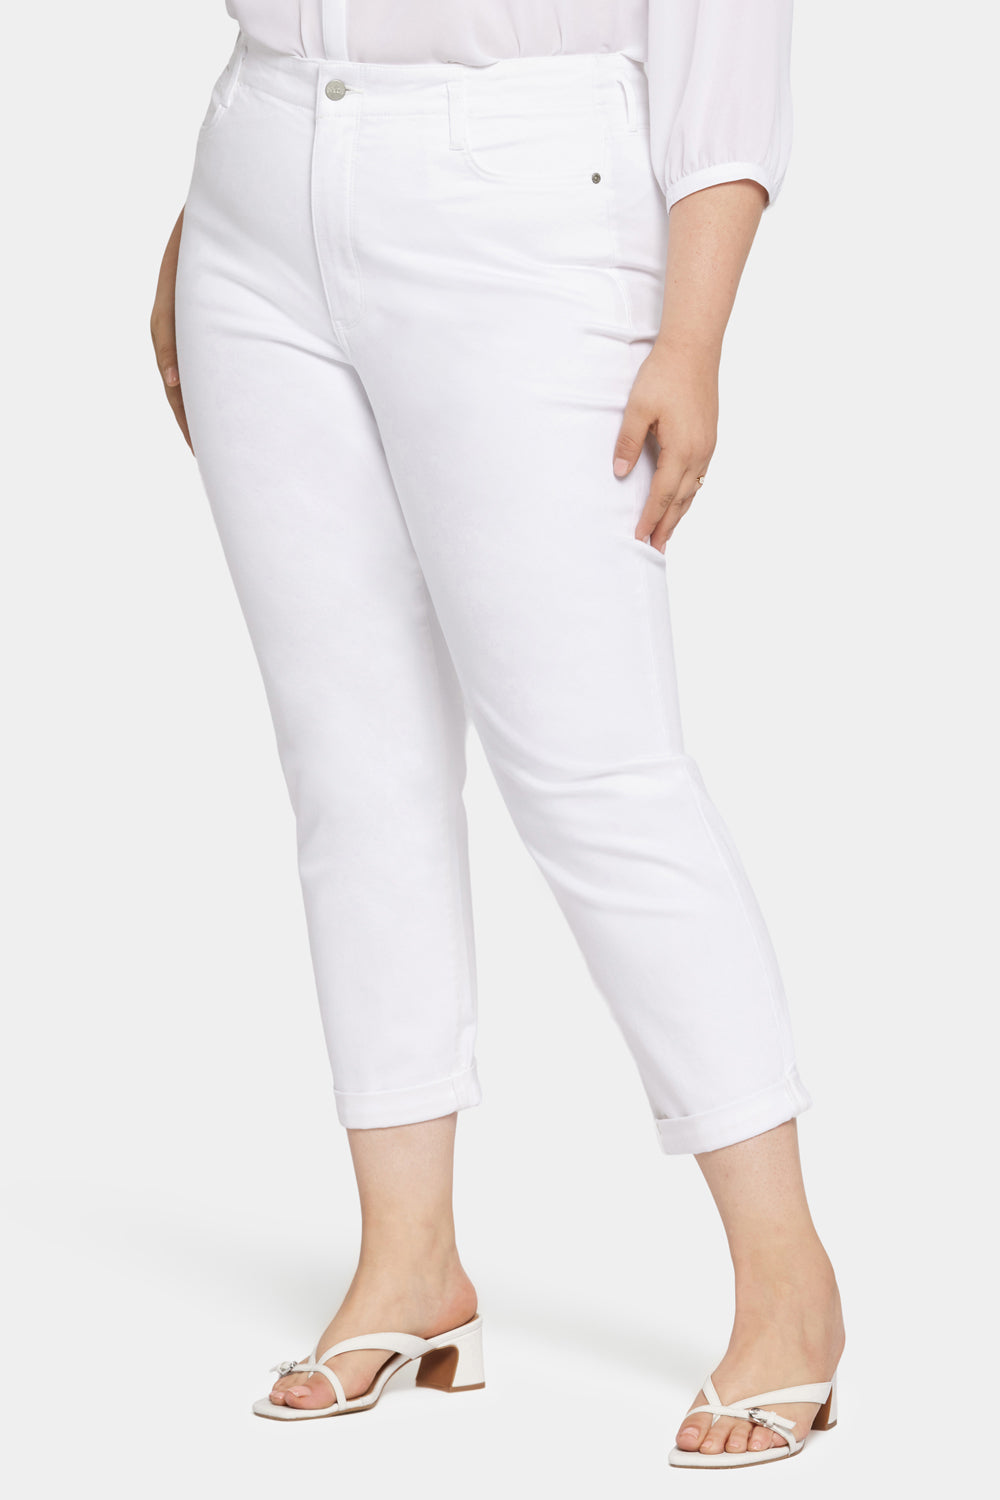 NYDJ Margot Girlfriend Jeans In Petite Plus Size With High Rise - Optic White